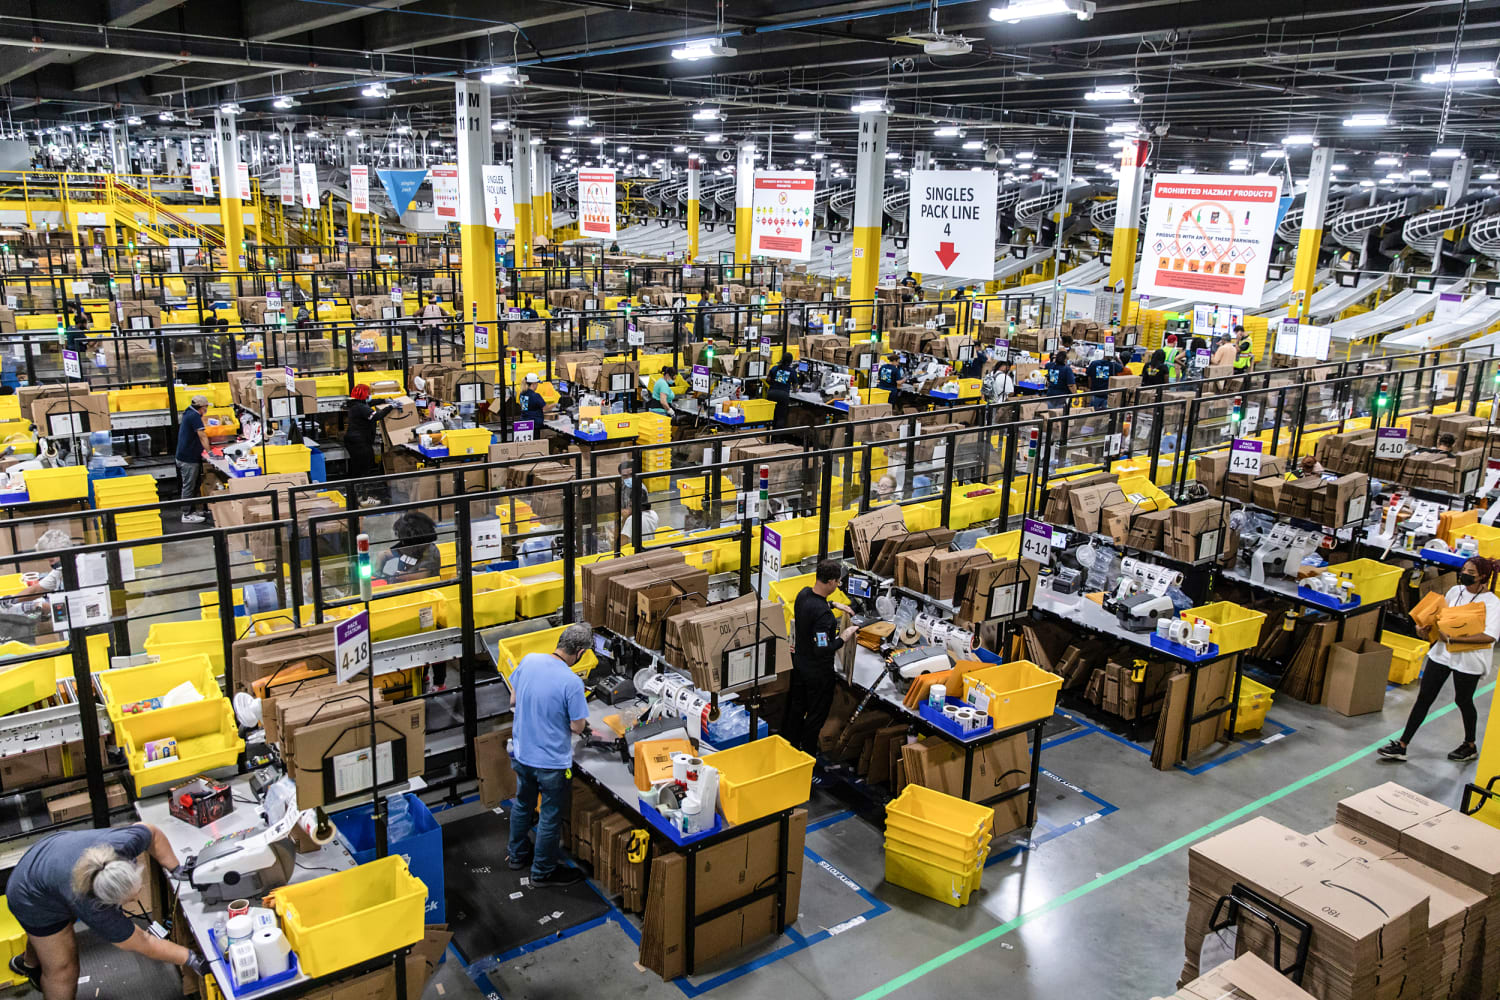 Amazon now employs almost 1 million people in the U.S. — or 1 in every 169 workers